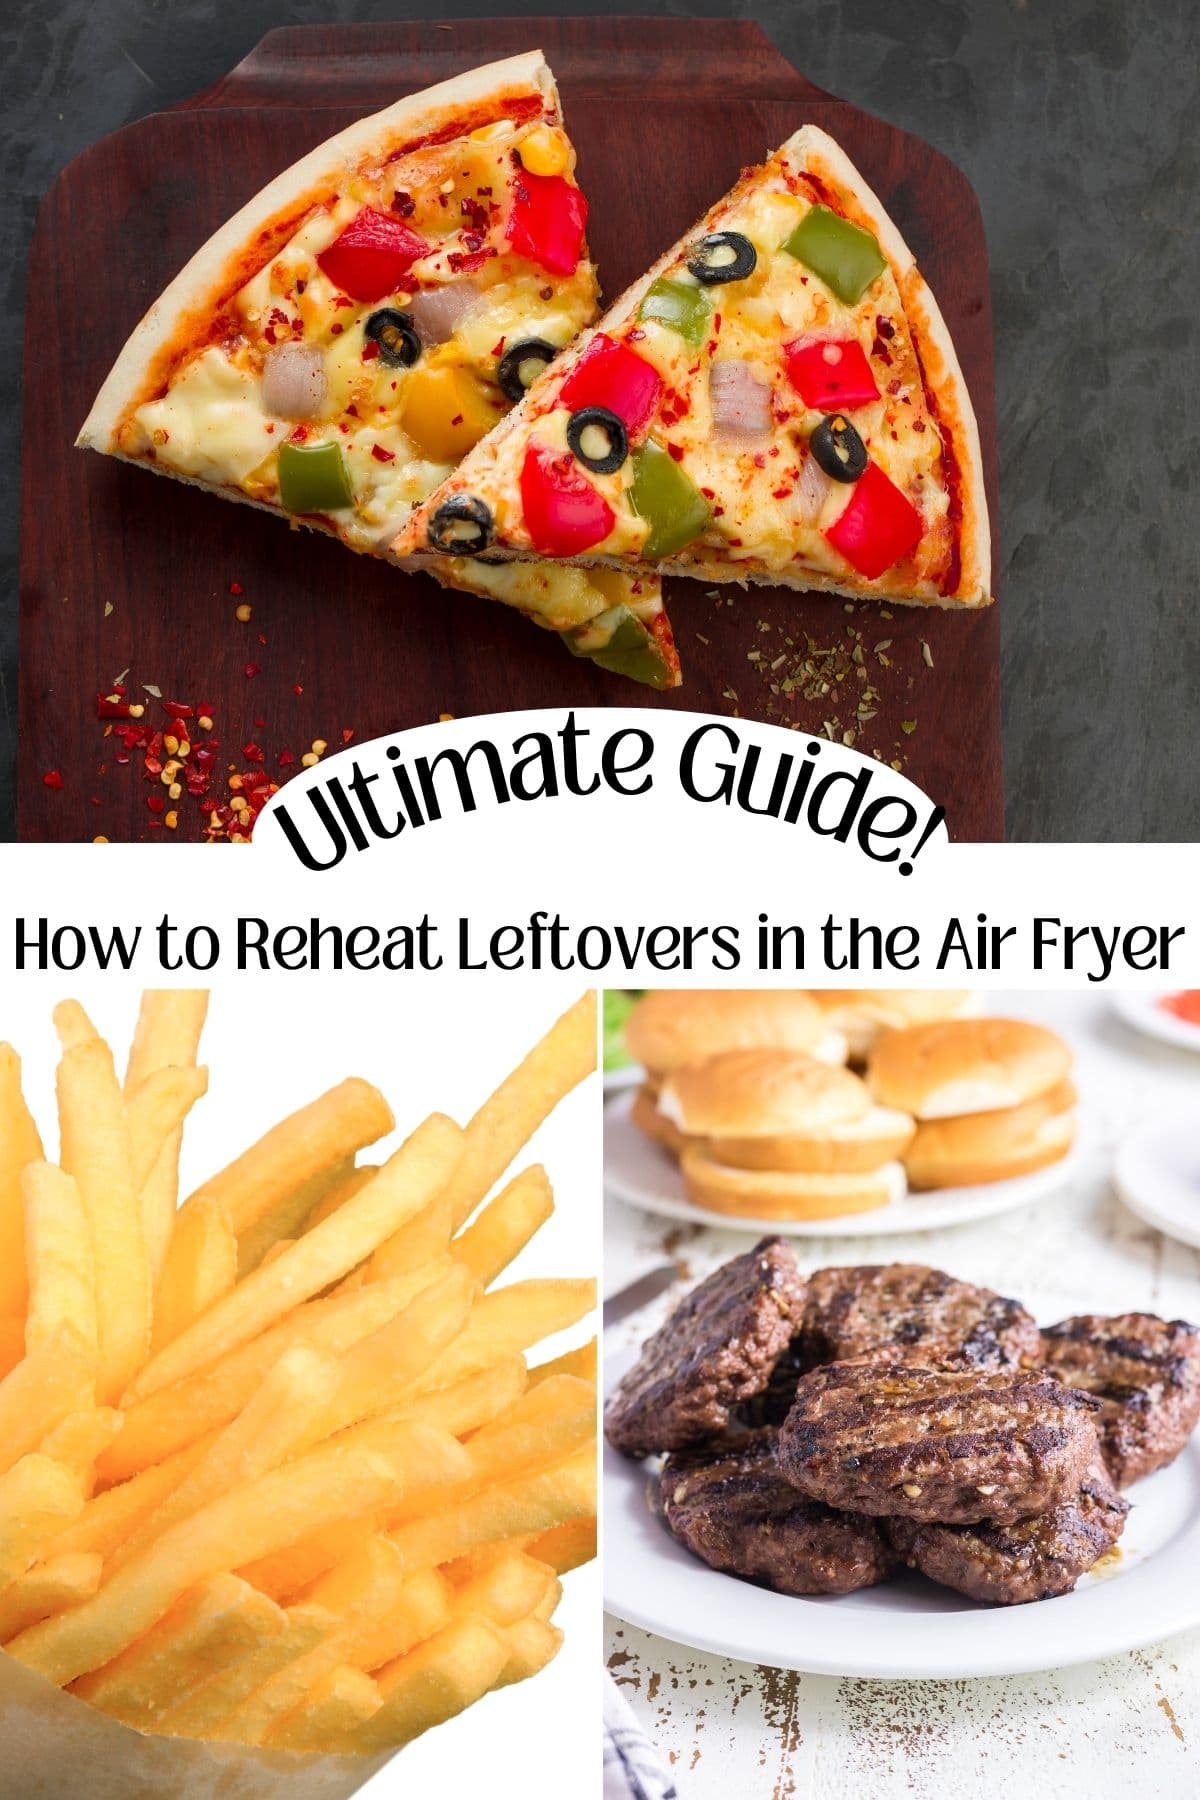 A collage of food images showing what you can reheat in an air fryer.